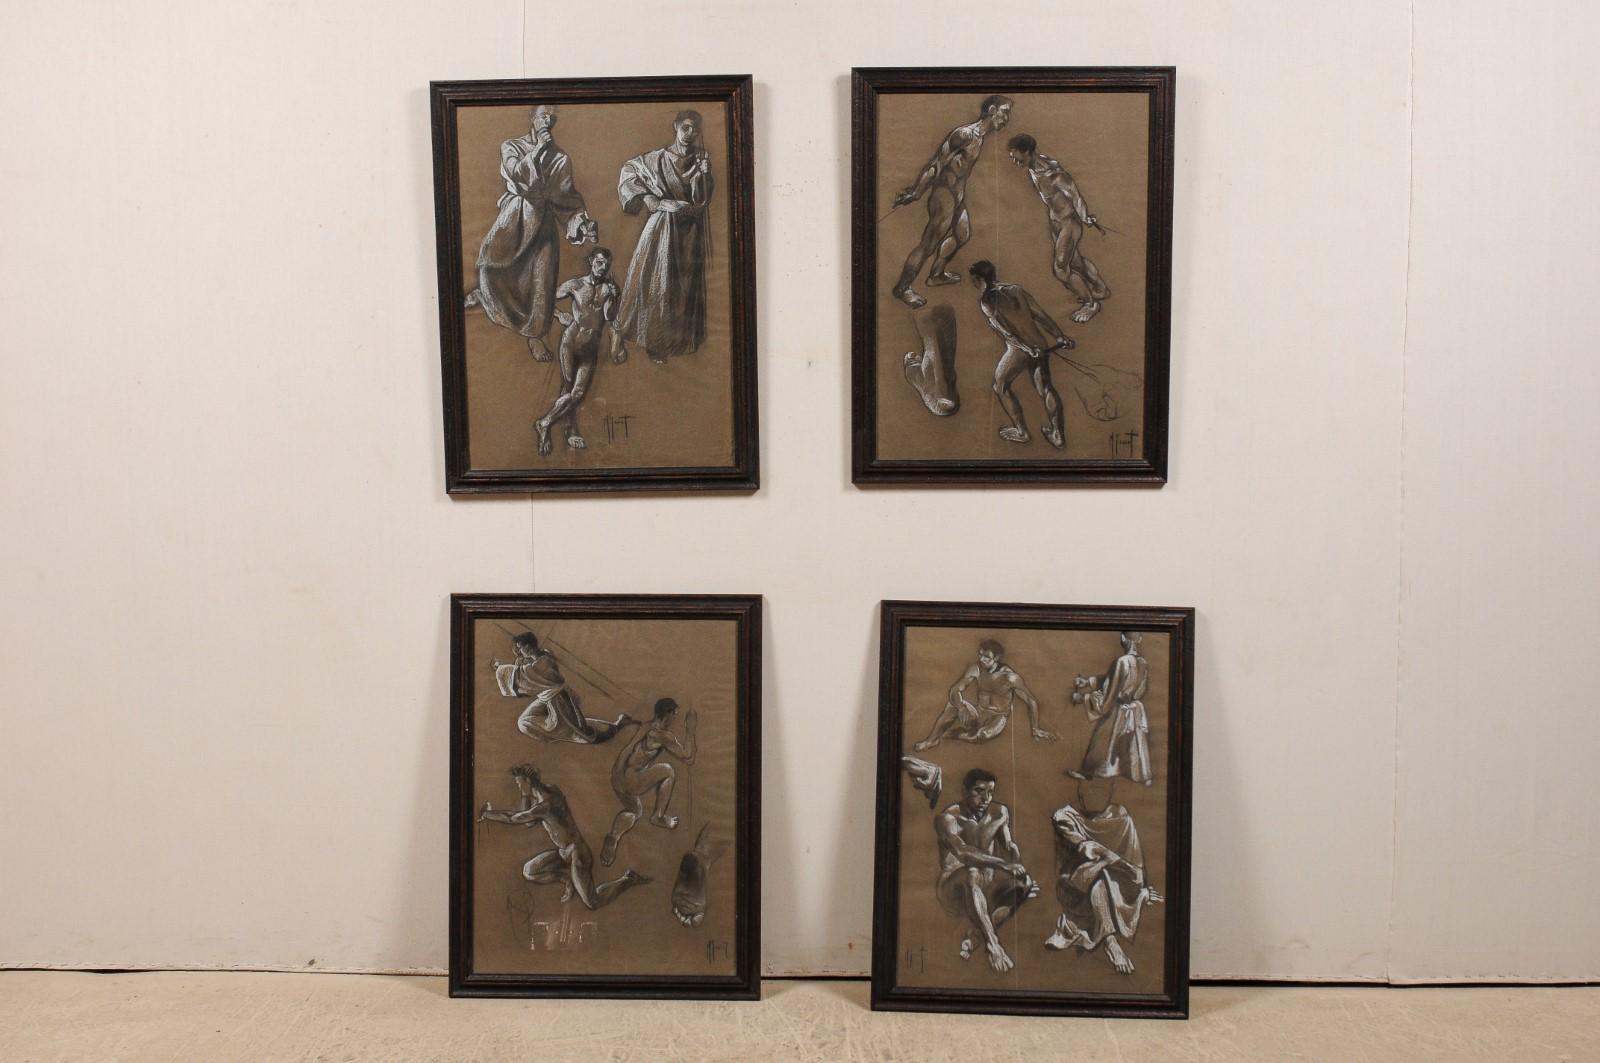 A collection of four European charcoal studies from the mid-20th century in matching wood frames. This set of vintage framed wall art feature charcoal sketches of nude and robed male figures, in various depictions of seating and motion. The sketches